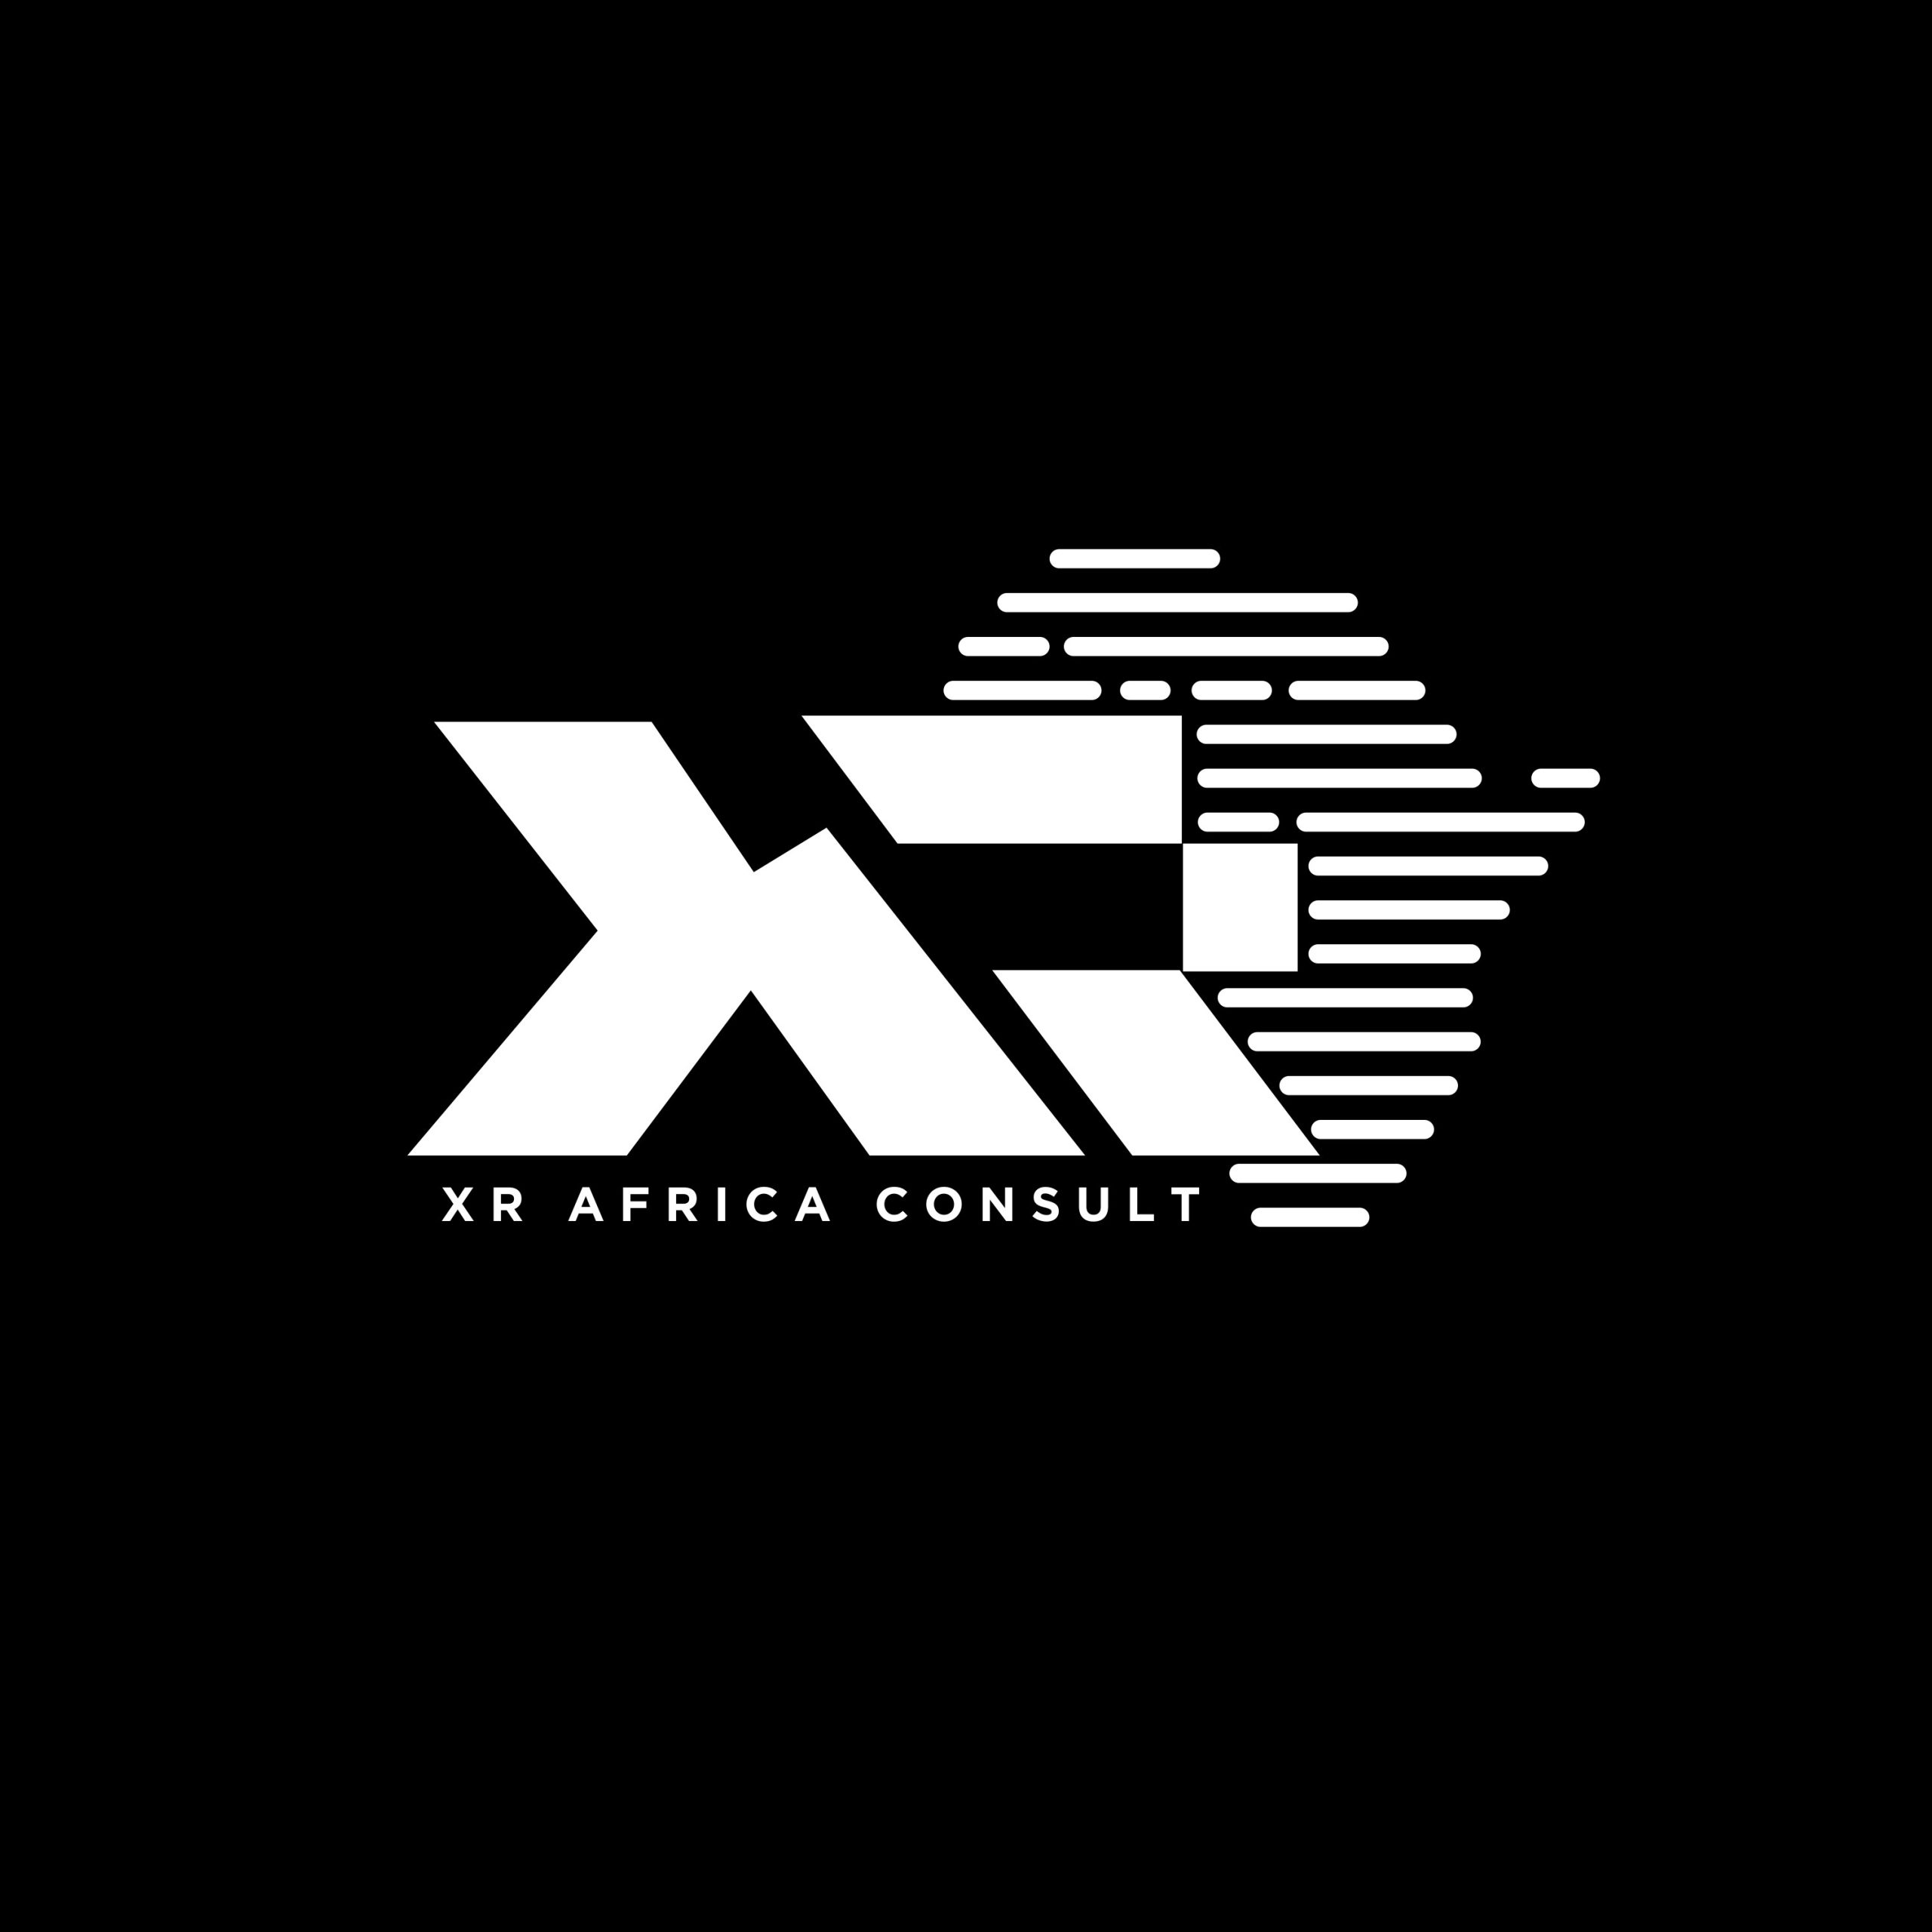 XR Africa Consult – Transforming your business through technology solutions